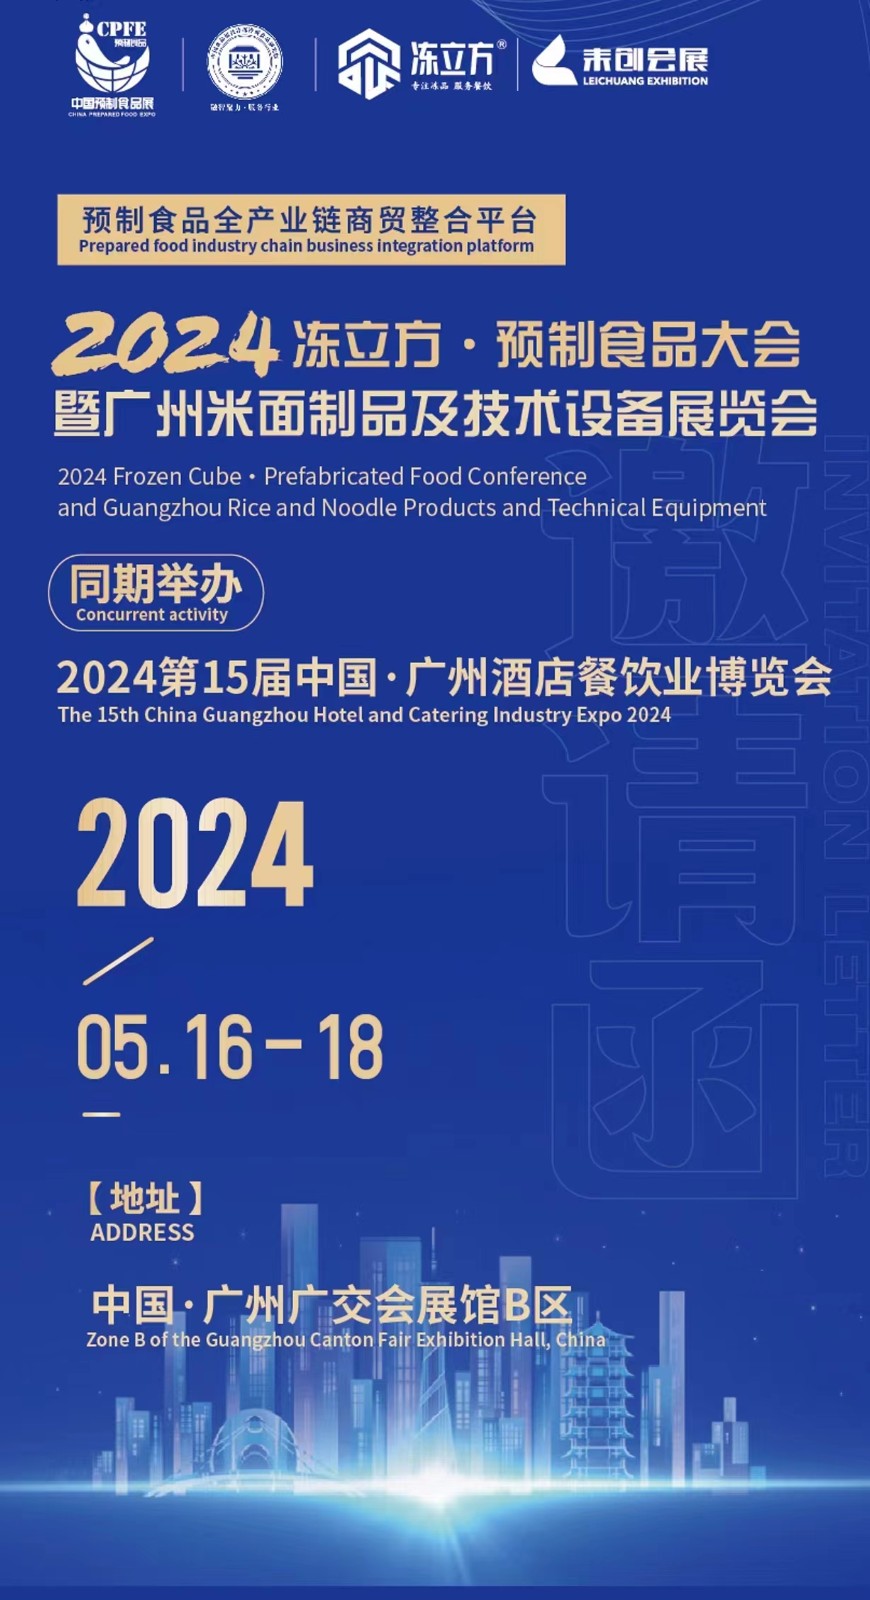 The 15th China Guangzhou Hotel and Catering Industry Expo in 2024 - www.globalomp.com